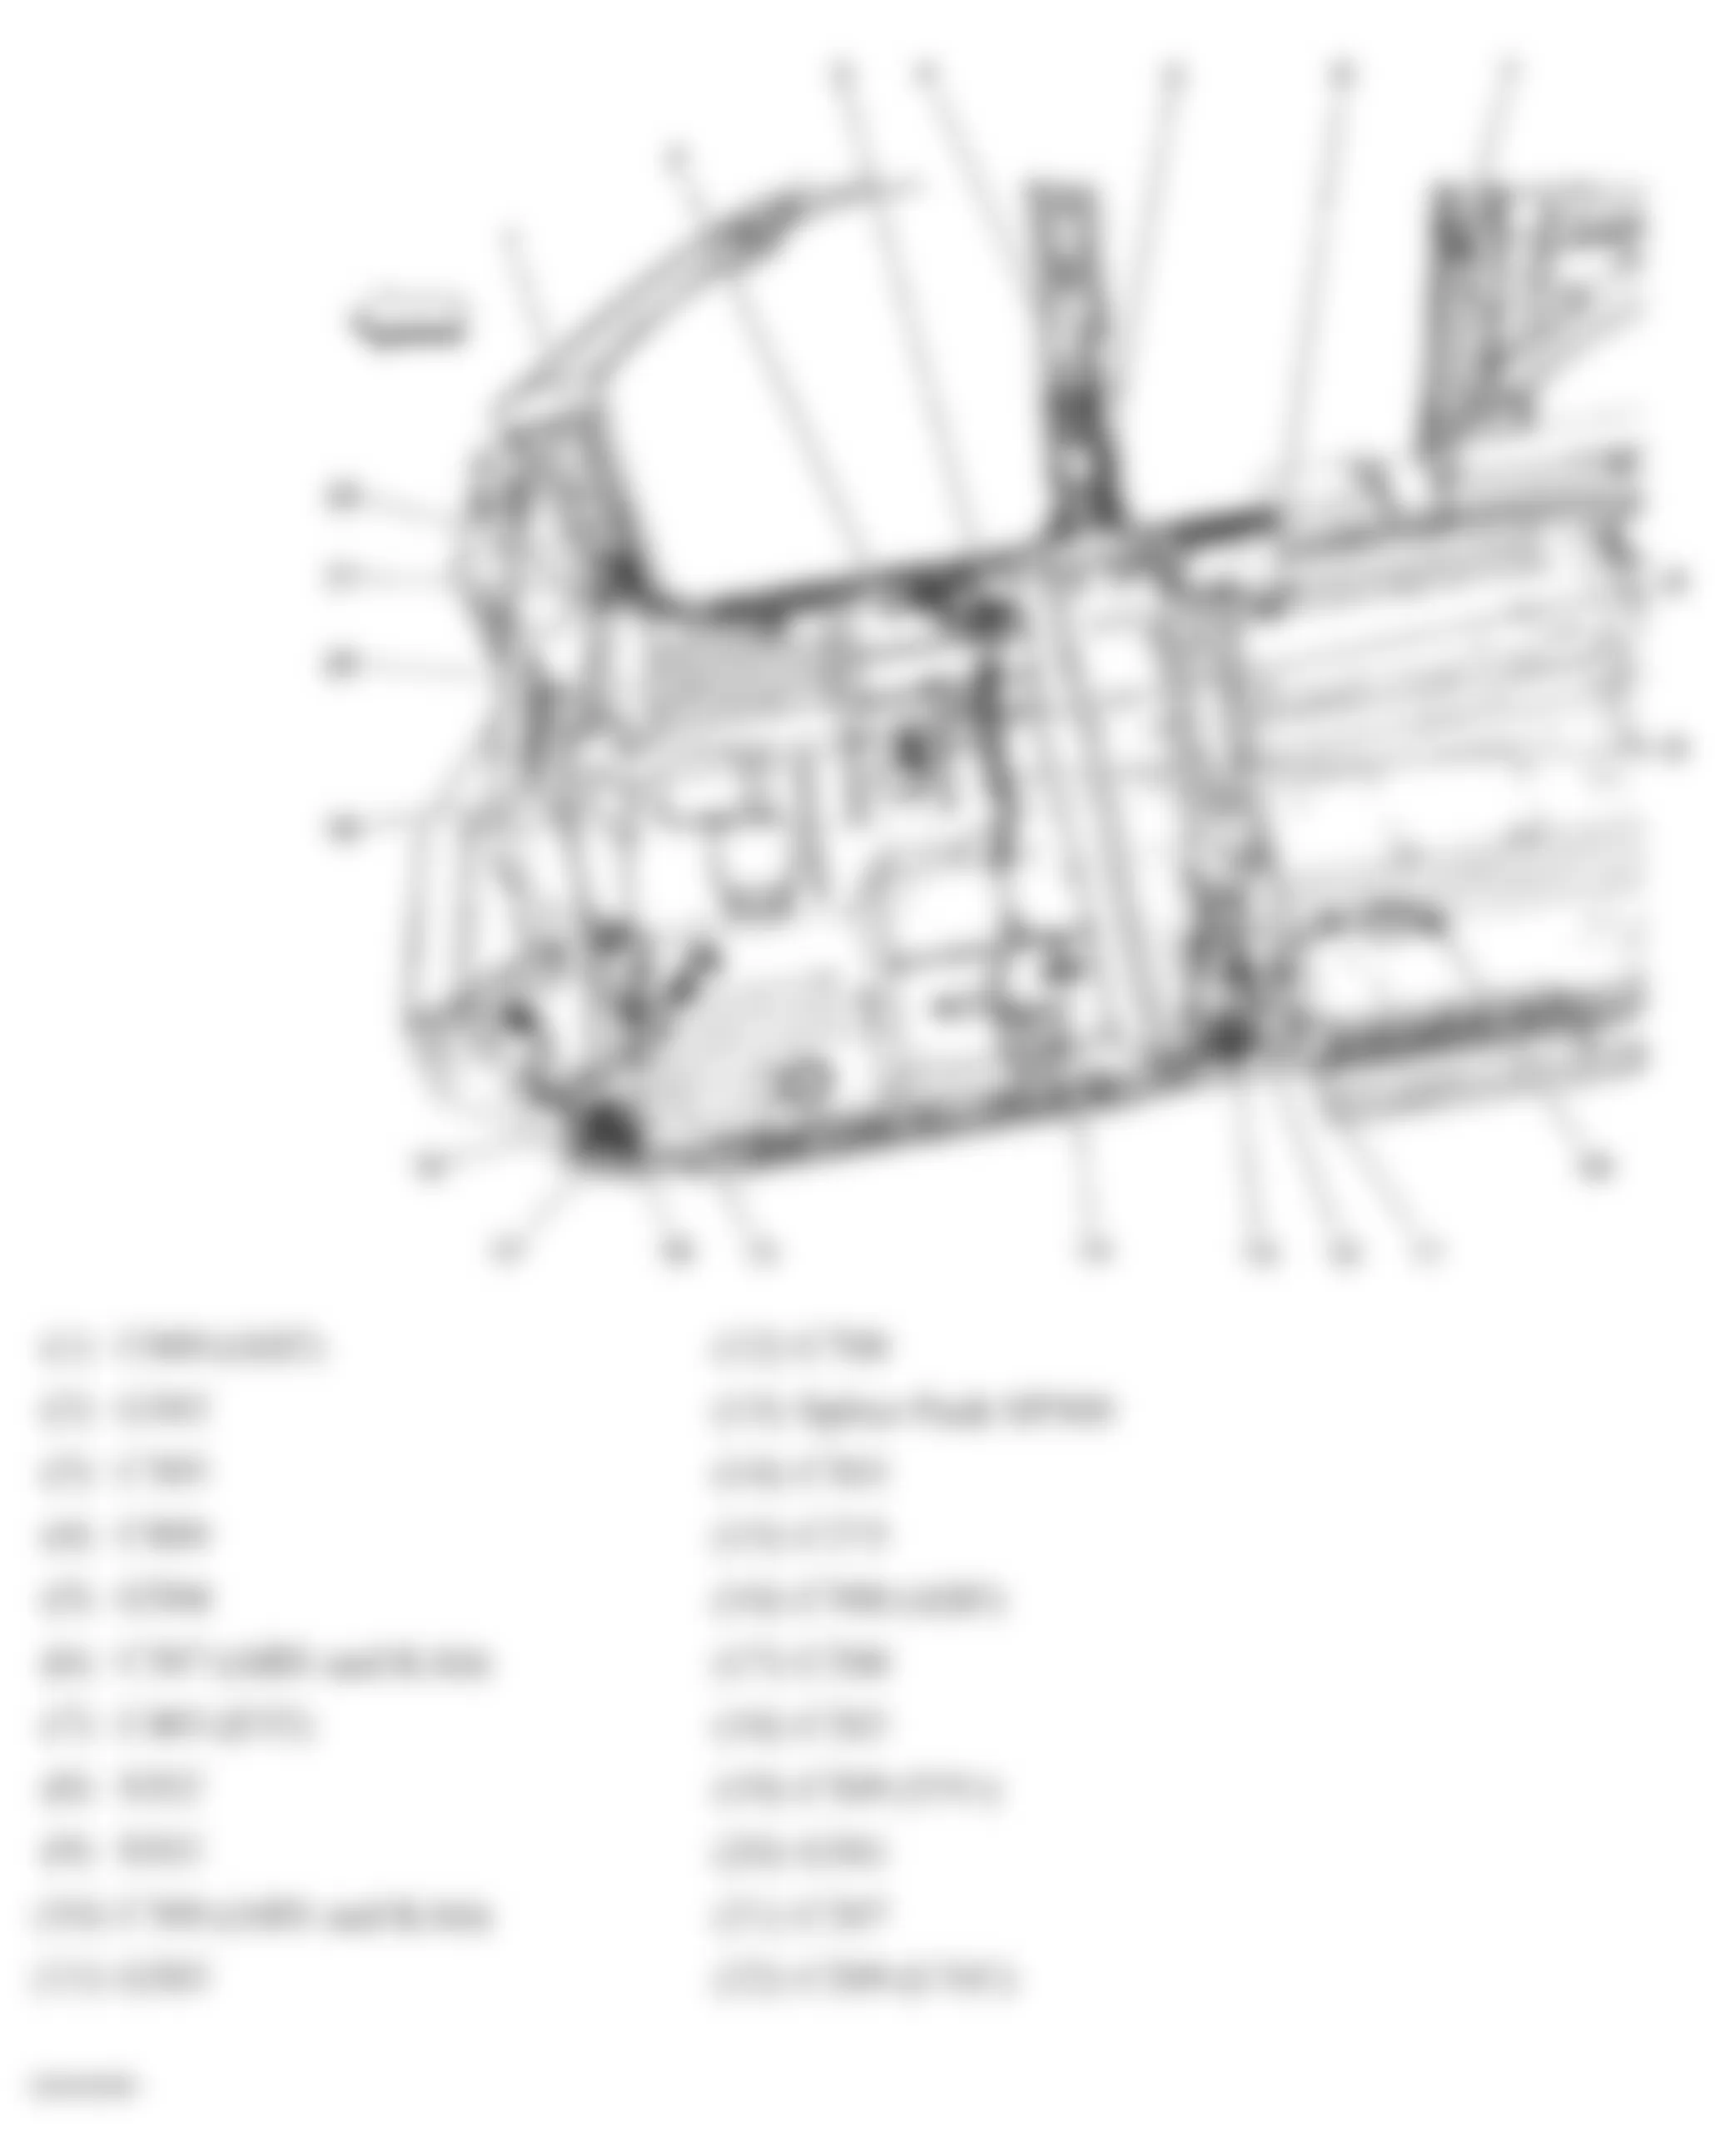 GMC Yukon 2007 - Component Locations -  Front Passenger Compartment (Long Wheel Base)